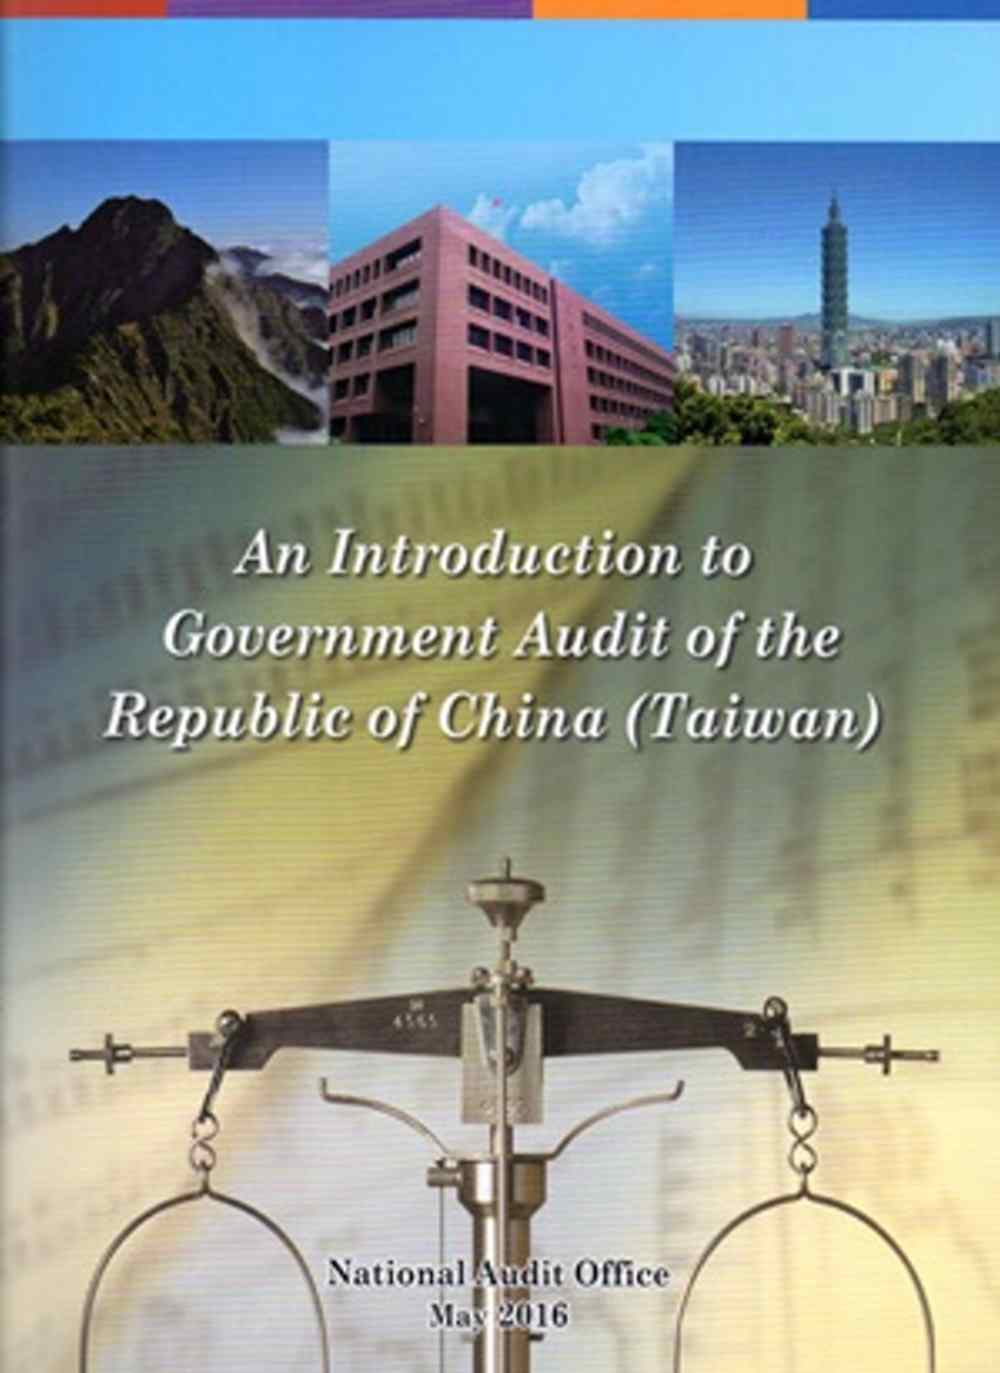 An Introduction to Government Audit of the Republic of China (Taiwan)